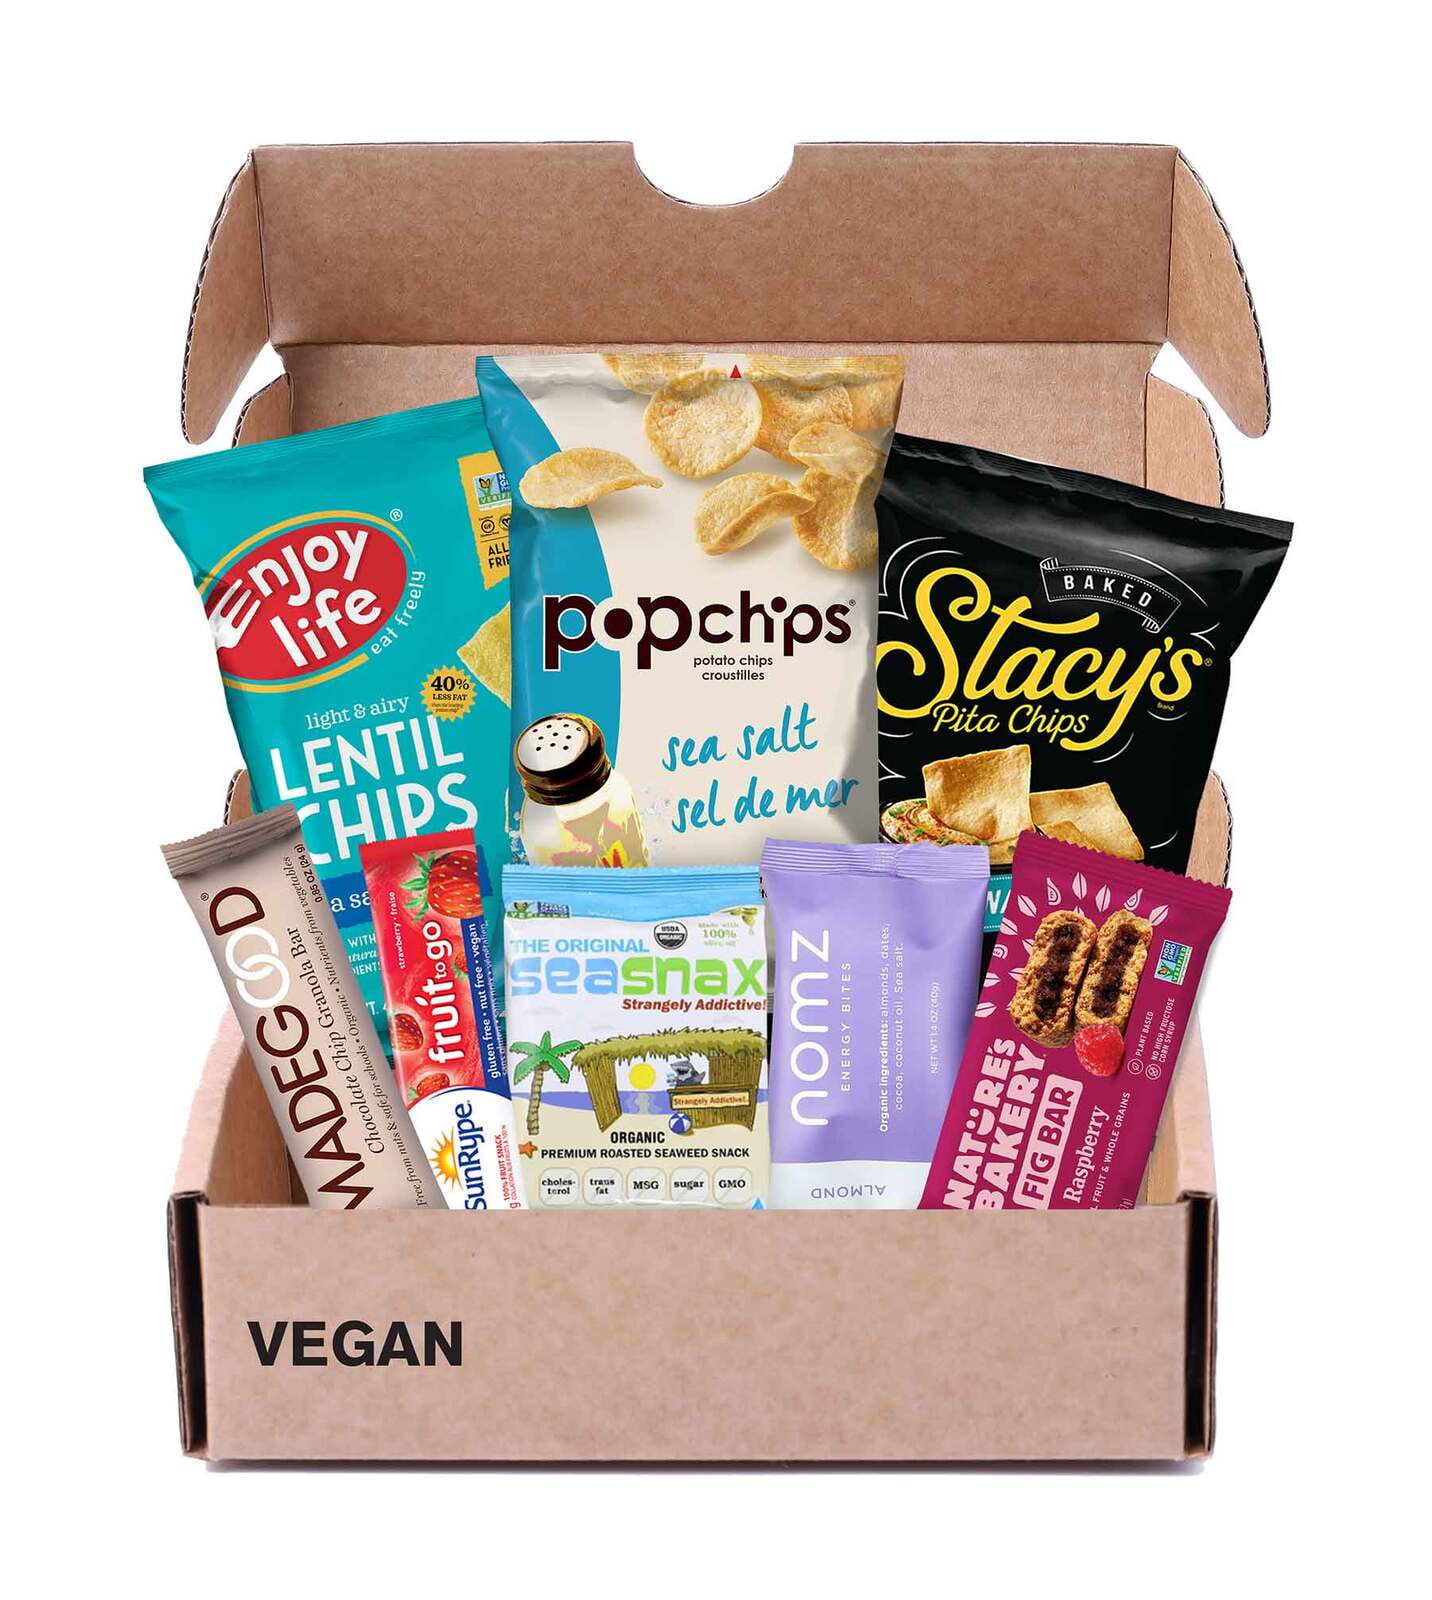 Healthy Snack Box – Deliver Local To My Kid